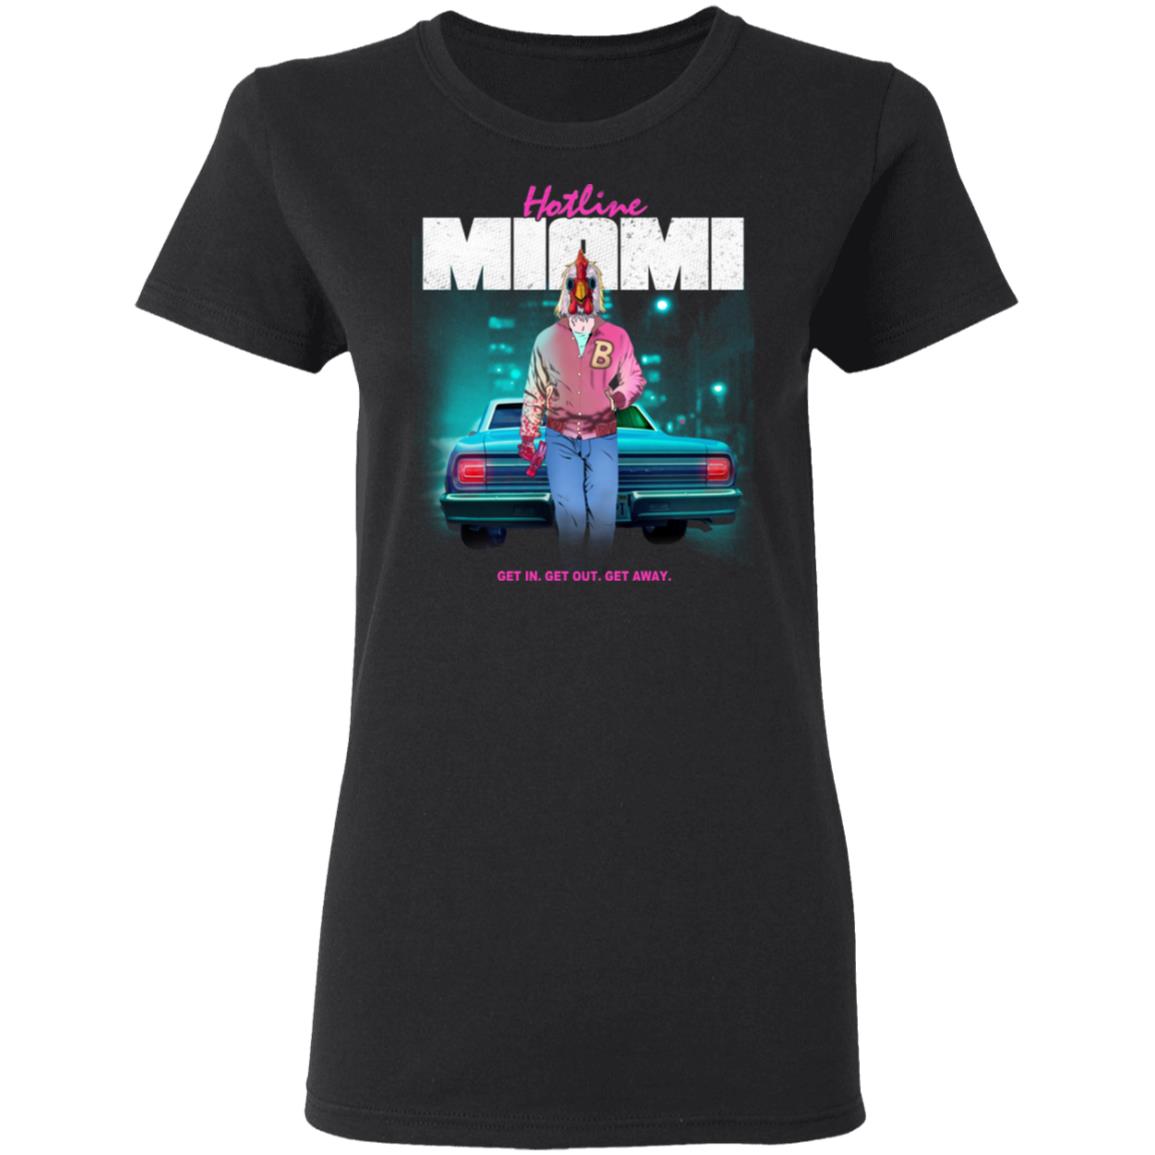 Hotline Miami Get In Get Out Get Away Shirt | El Real Tex-Mex